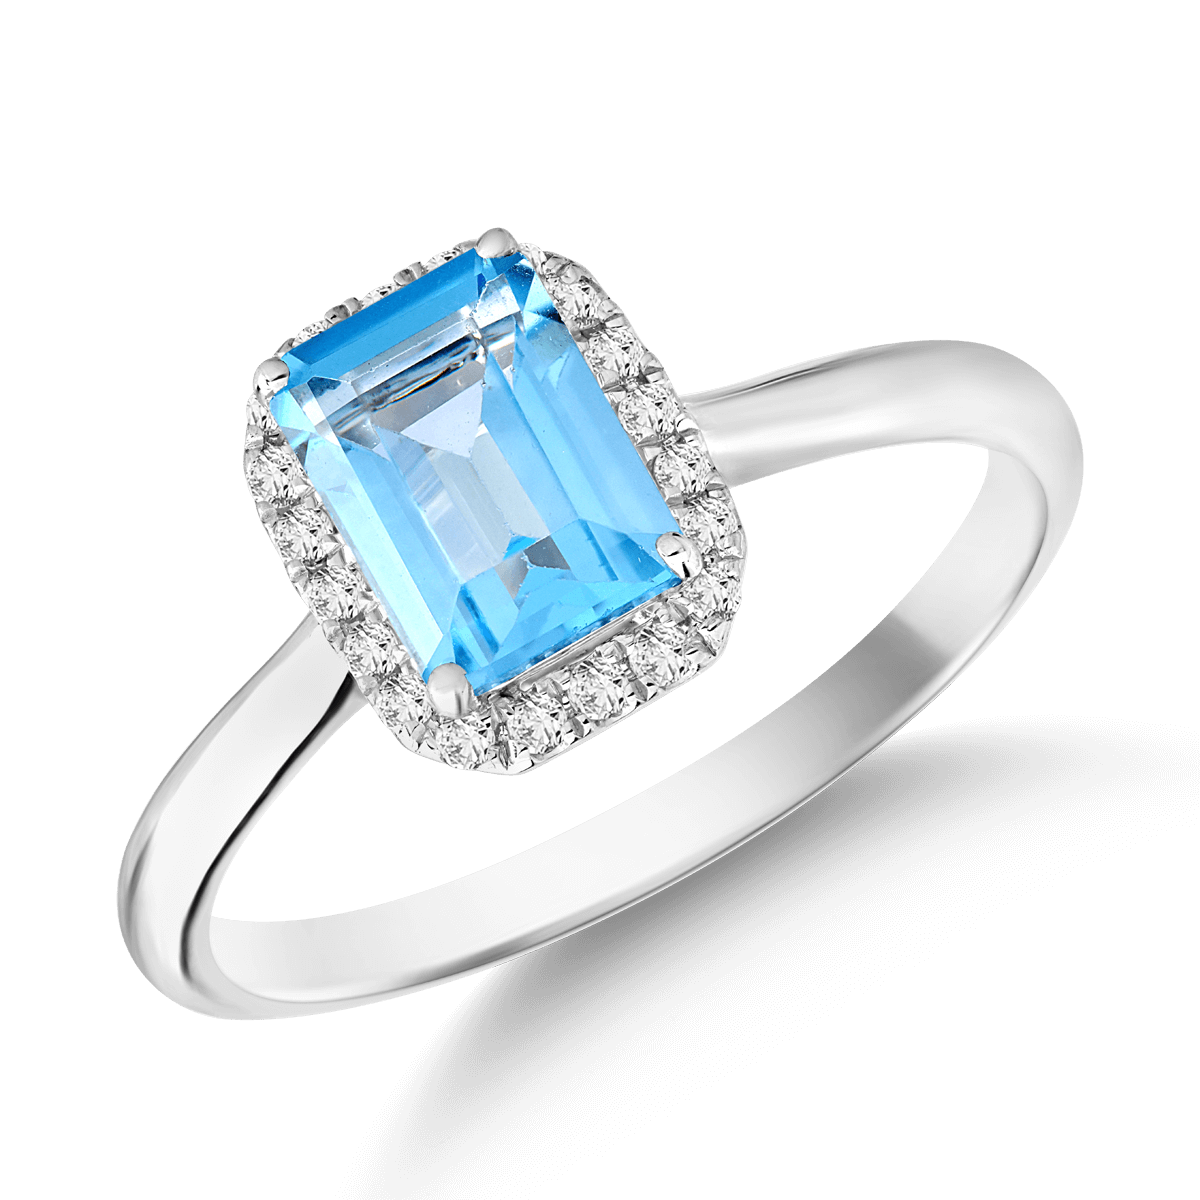 18K white gold ring with 1.17ct blue topaz and 0.1ct diamonds